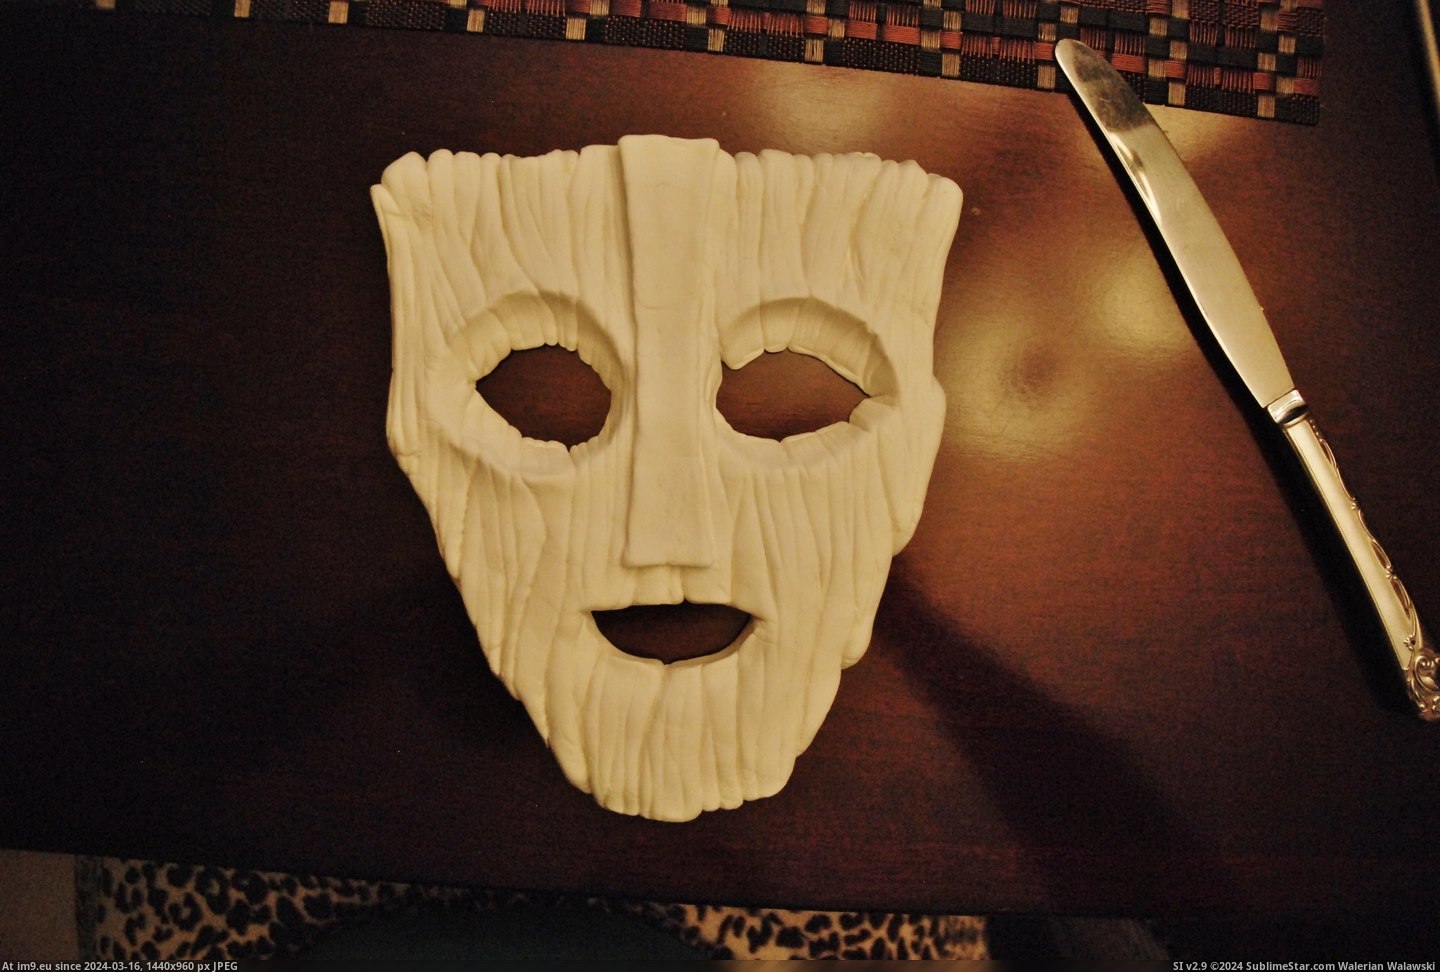 #Movie #Wanted #Stores #Superheroes #Manag #Son #Mask [Pics] My son wanted the mask from the movie the Mask, but it's all superheroes in stores these days so I made it for him. Manag Pic. (Bild von album My r/PICS favs))